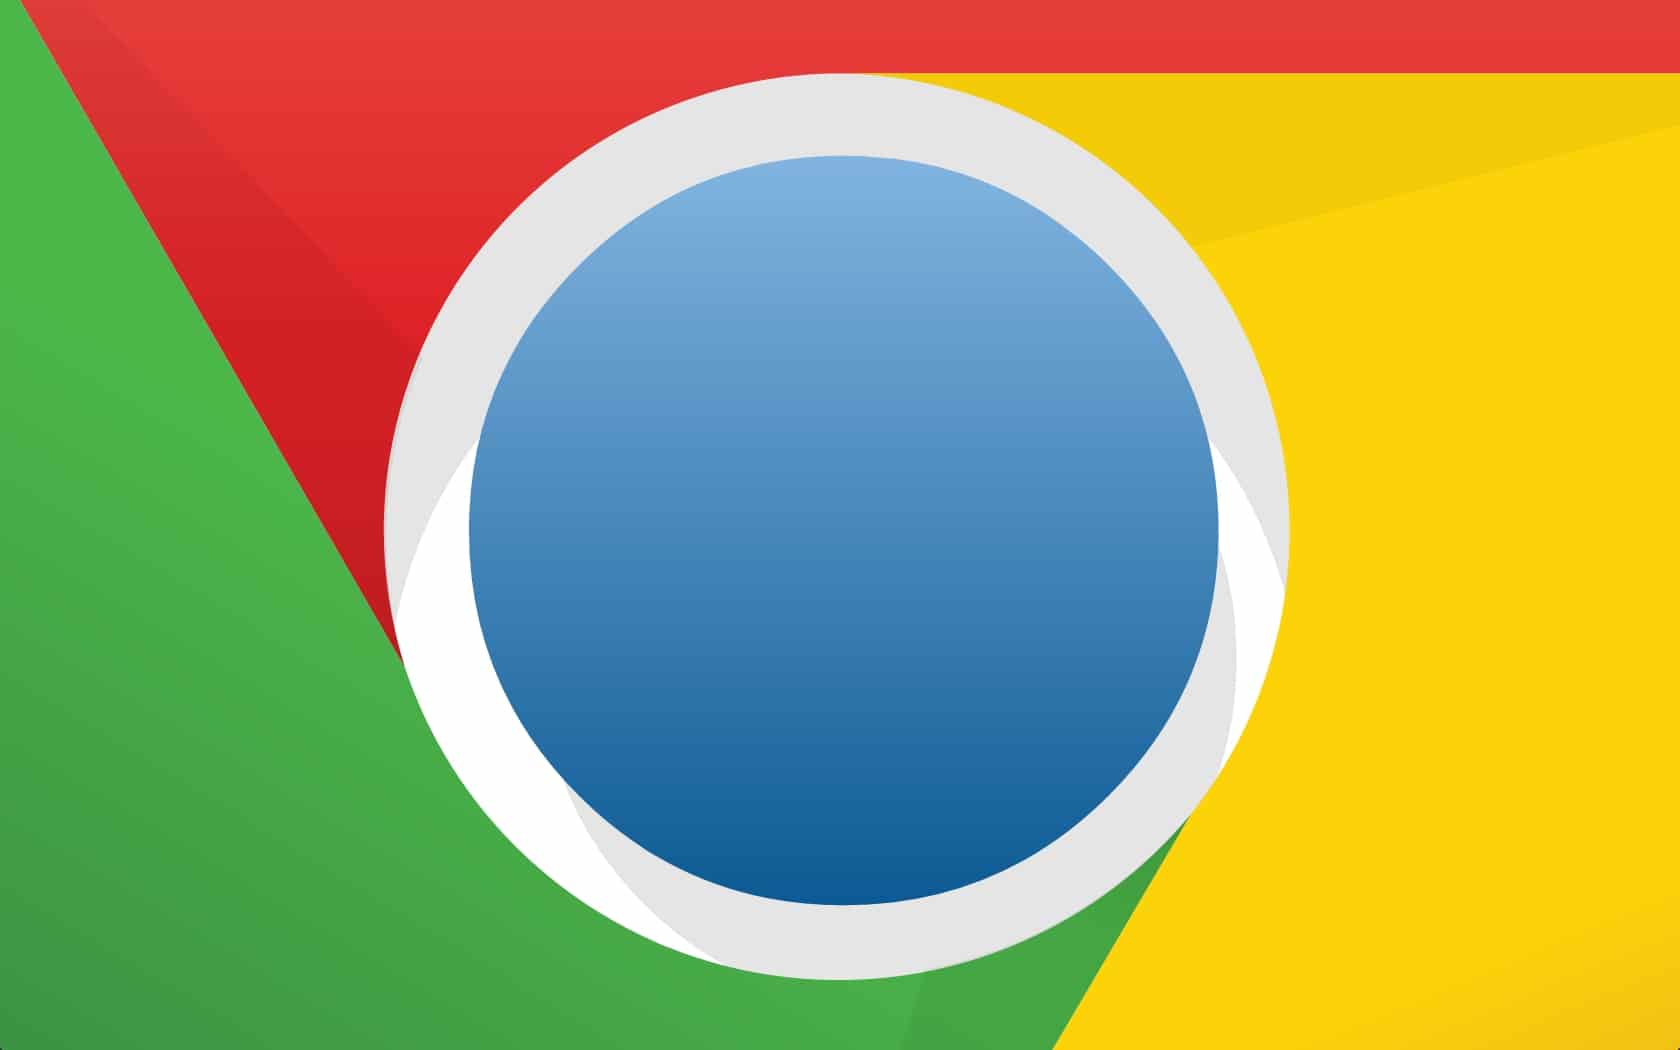 Google Chrome: so it fights color blindness with new development tools in the web browser